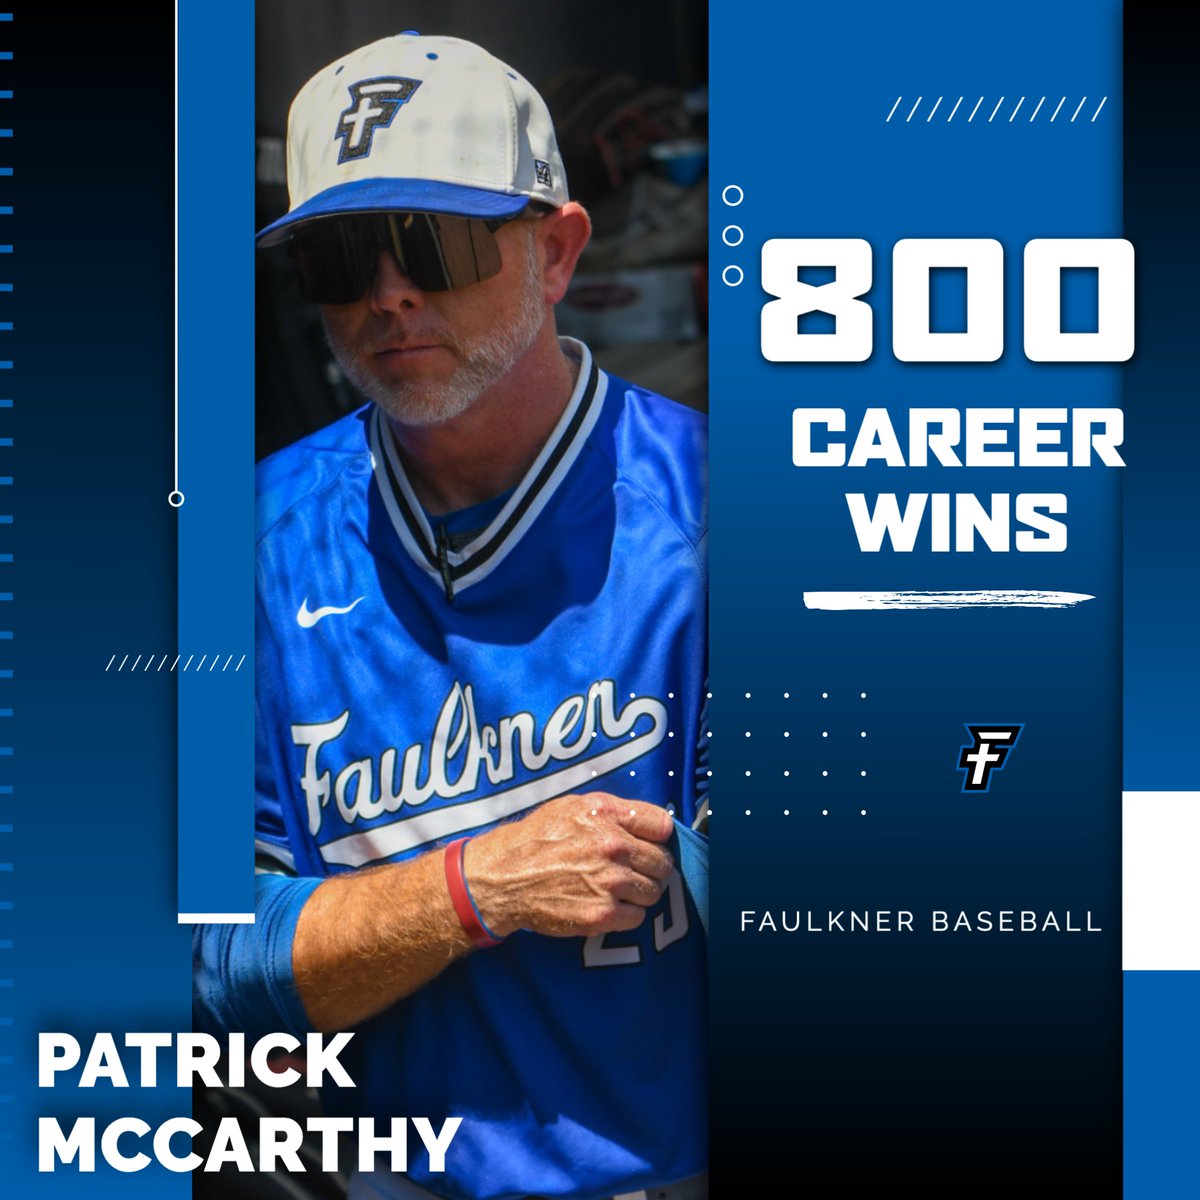 After a 3-0 shutout win over OUAZ In the first game of the Opening Round, the 🐐 has 800 wins!